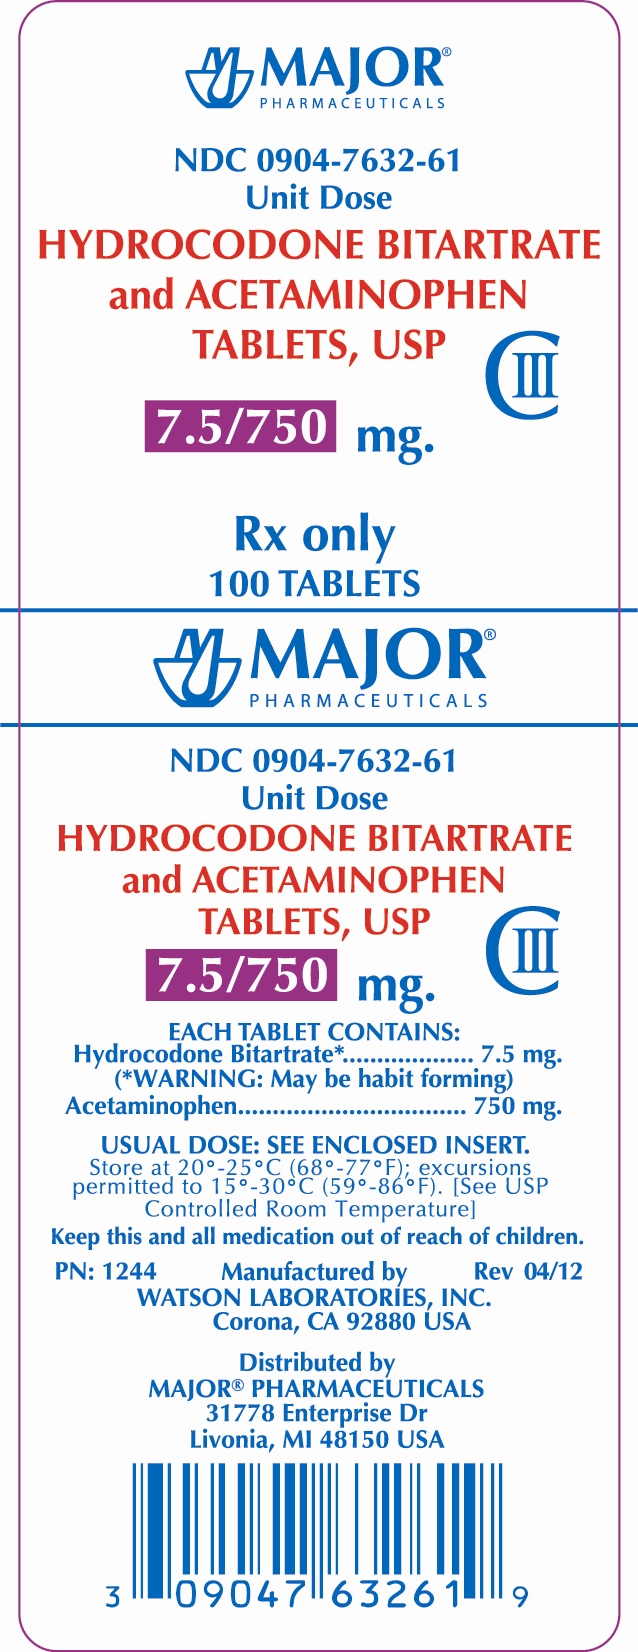 HYDROCODONE BITARTRATE AND ACETAMINOPHEN TABLETS, USP 7.5/750MG